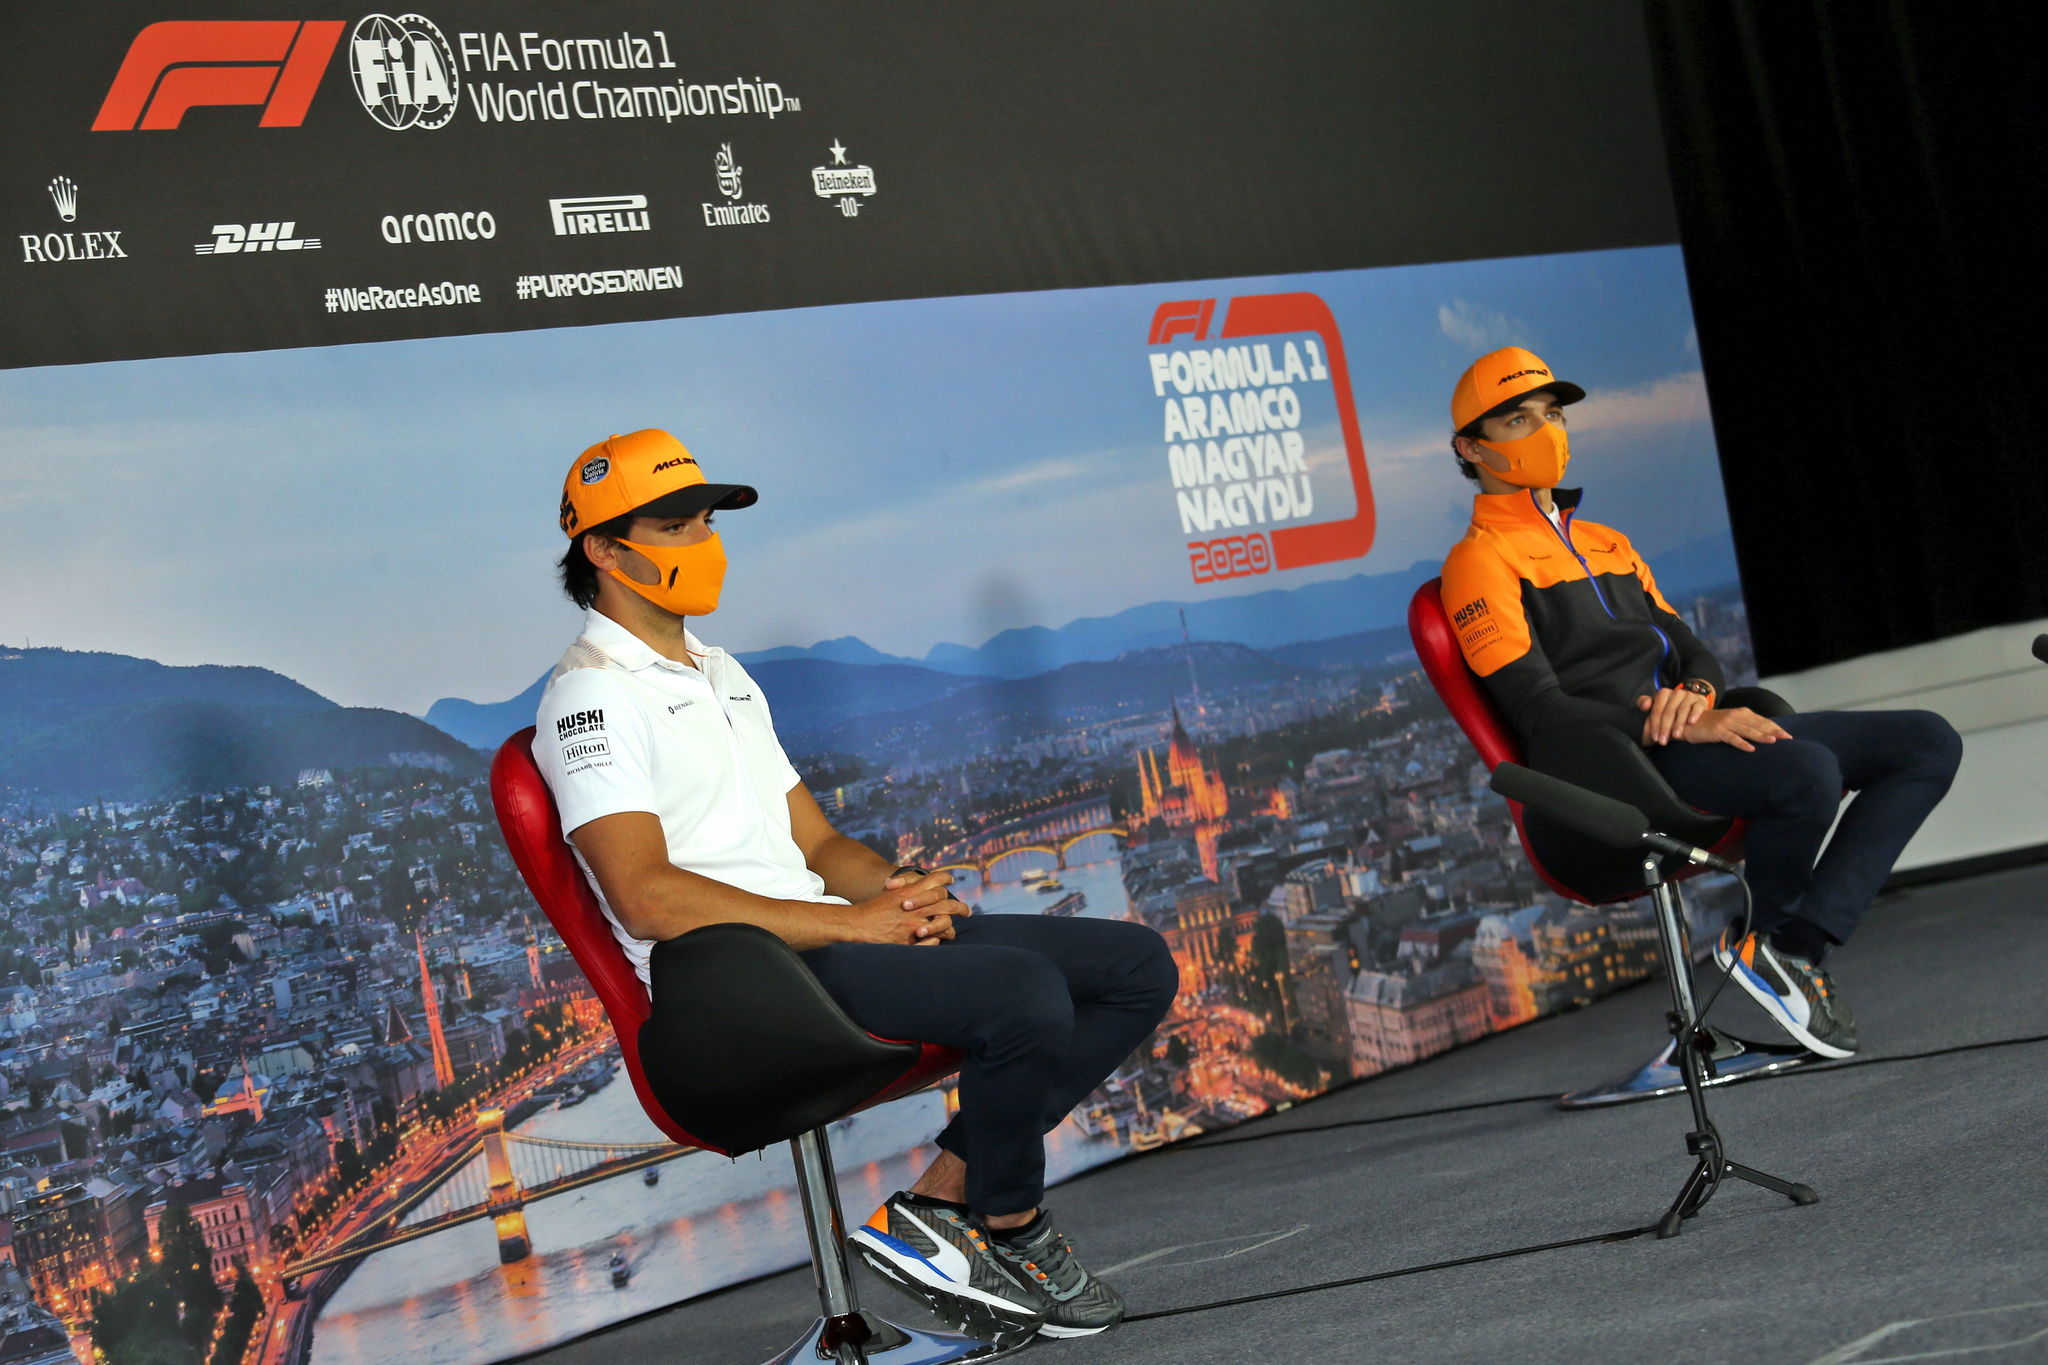 Mogyorod (Hungary), 16/07/2020.- A handout photo made available by the FIA shows Spanish Formula One driver Carlos lt;HIT gt;Sainz lt;/HIT gt; (L) and British Formula One driver Lando Norris from team Mclaren during the FIA Press Conference for the Formula One Grand Prix of Hungary in Mogyorod, Hungary, 16 July 2020. (Frmula Uno, Hungra) EFE/EPA/FIA/F1 HANDOUT SHUTTERSTOCK OUT HANDOUT EDITORIAL USE ONLY/NO SALES